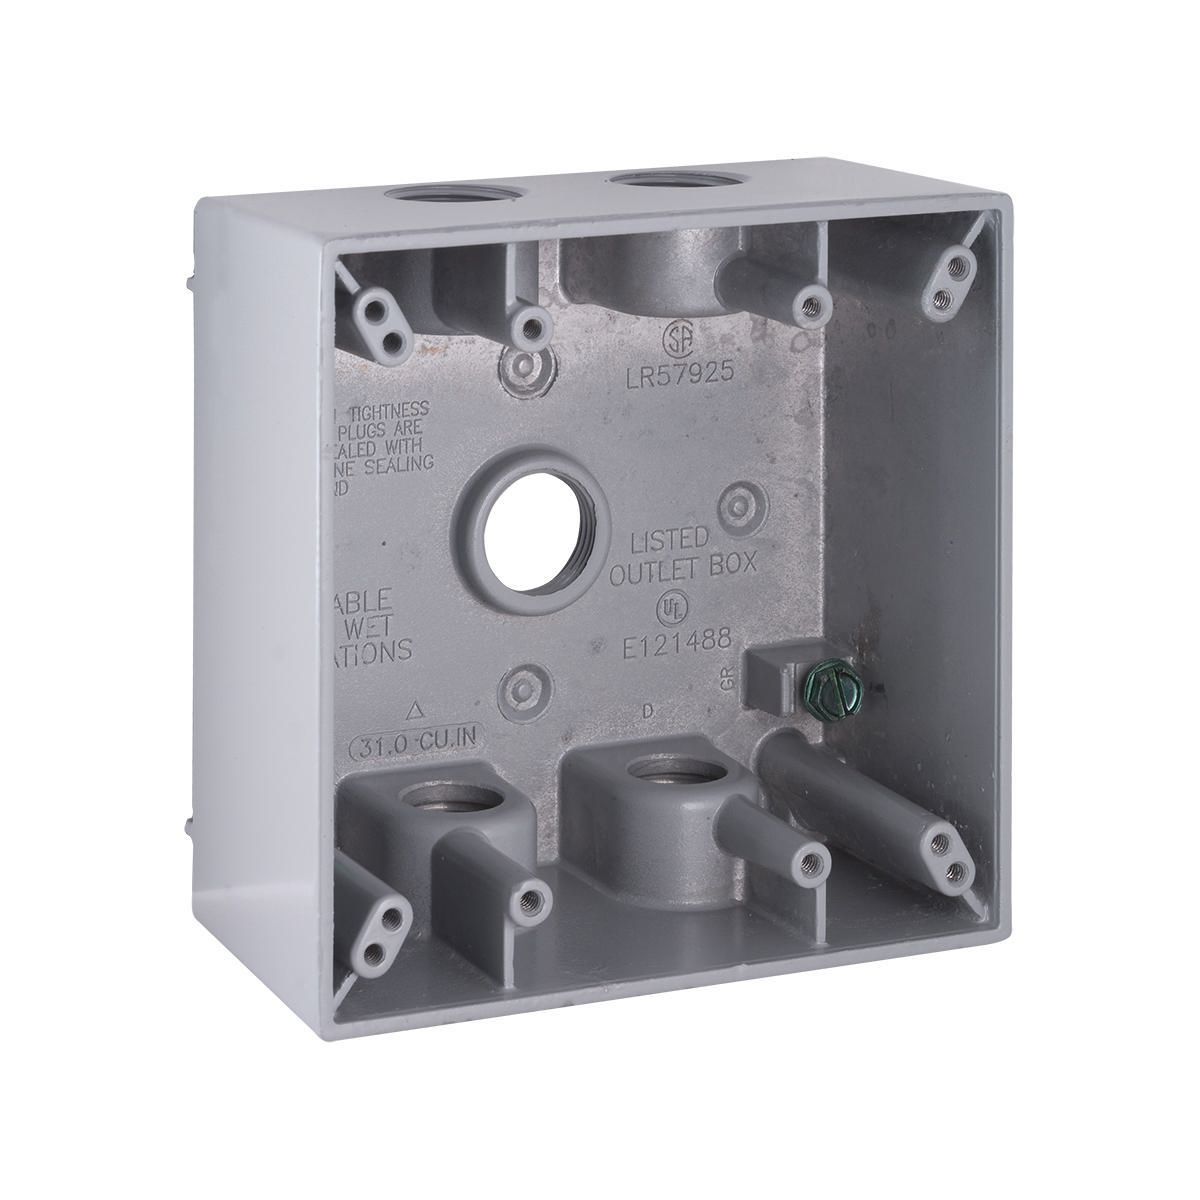 RAC 5337-0 2G WP BOX (5) 1/2 IN. OUTLETS - GRAY REPLACES TAYMDB550S